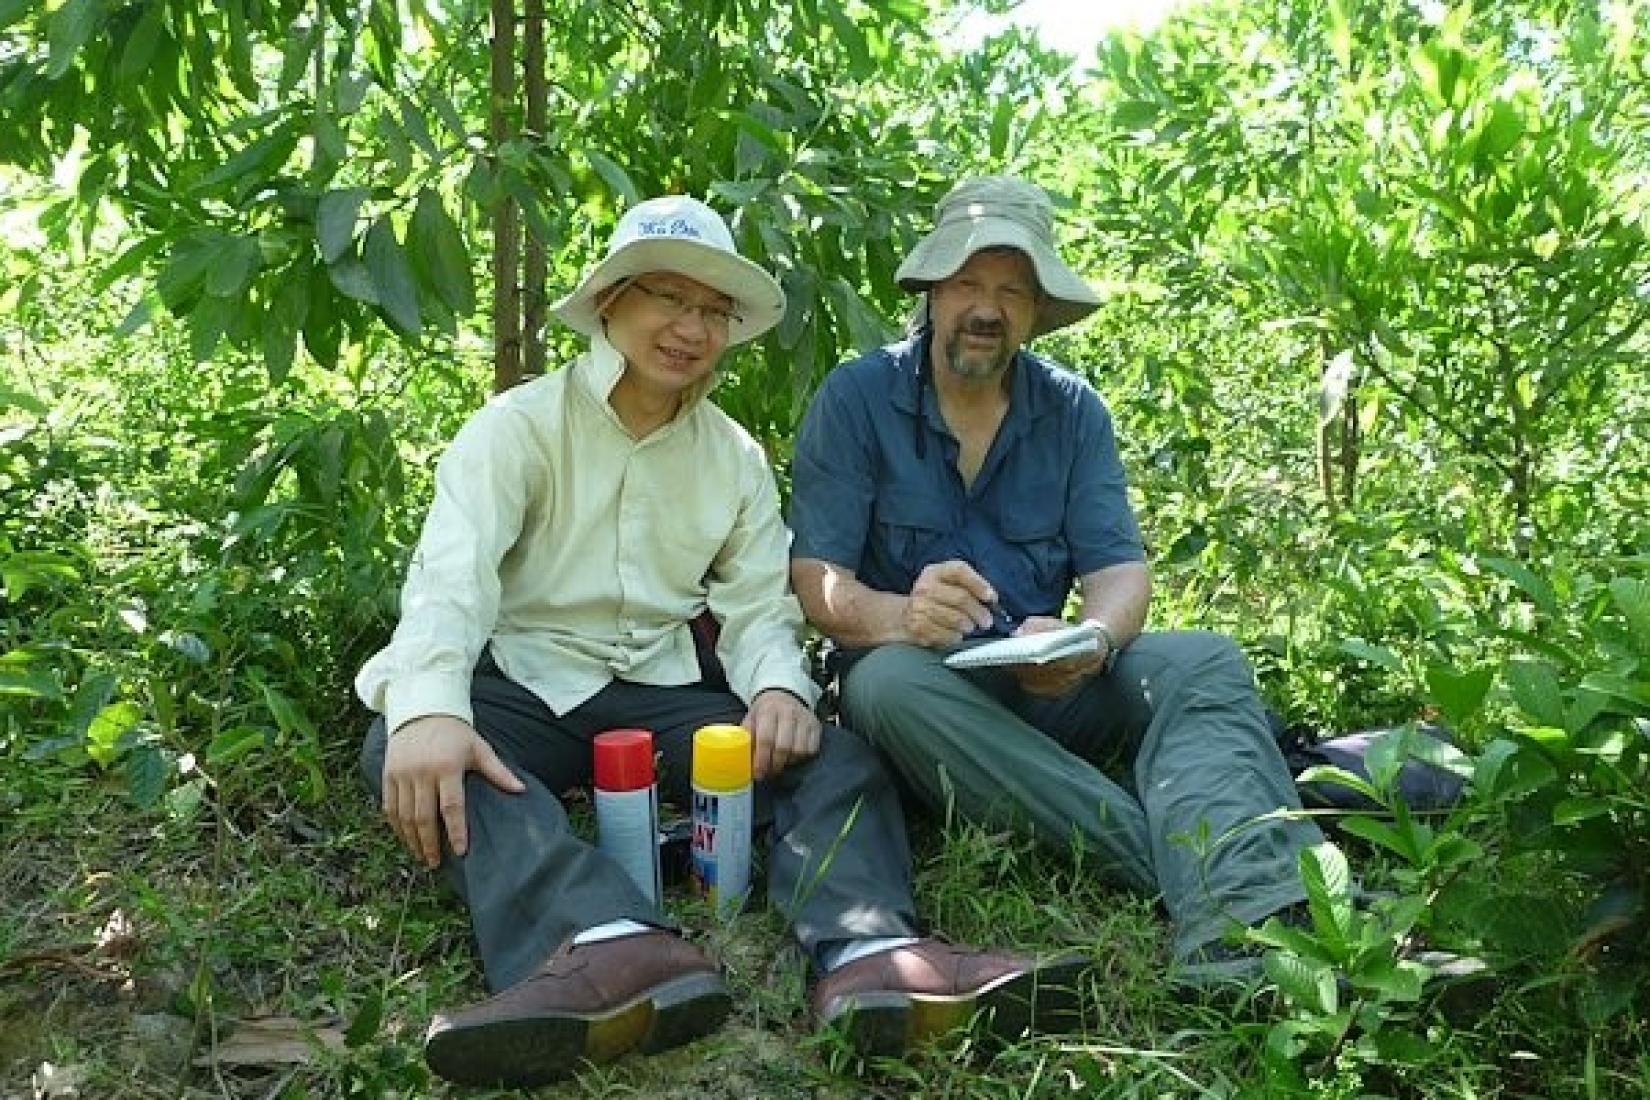 Do Huu Son of the Vietnamese Academy of Forest Sciences and Chris Harwood review their selections of candidate acacia hybrid trees they have been making in a young field trial in central Vietnam. Photo: Dr Pham Xuan Dinh